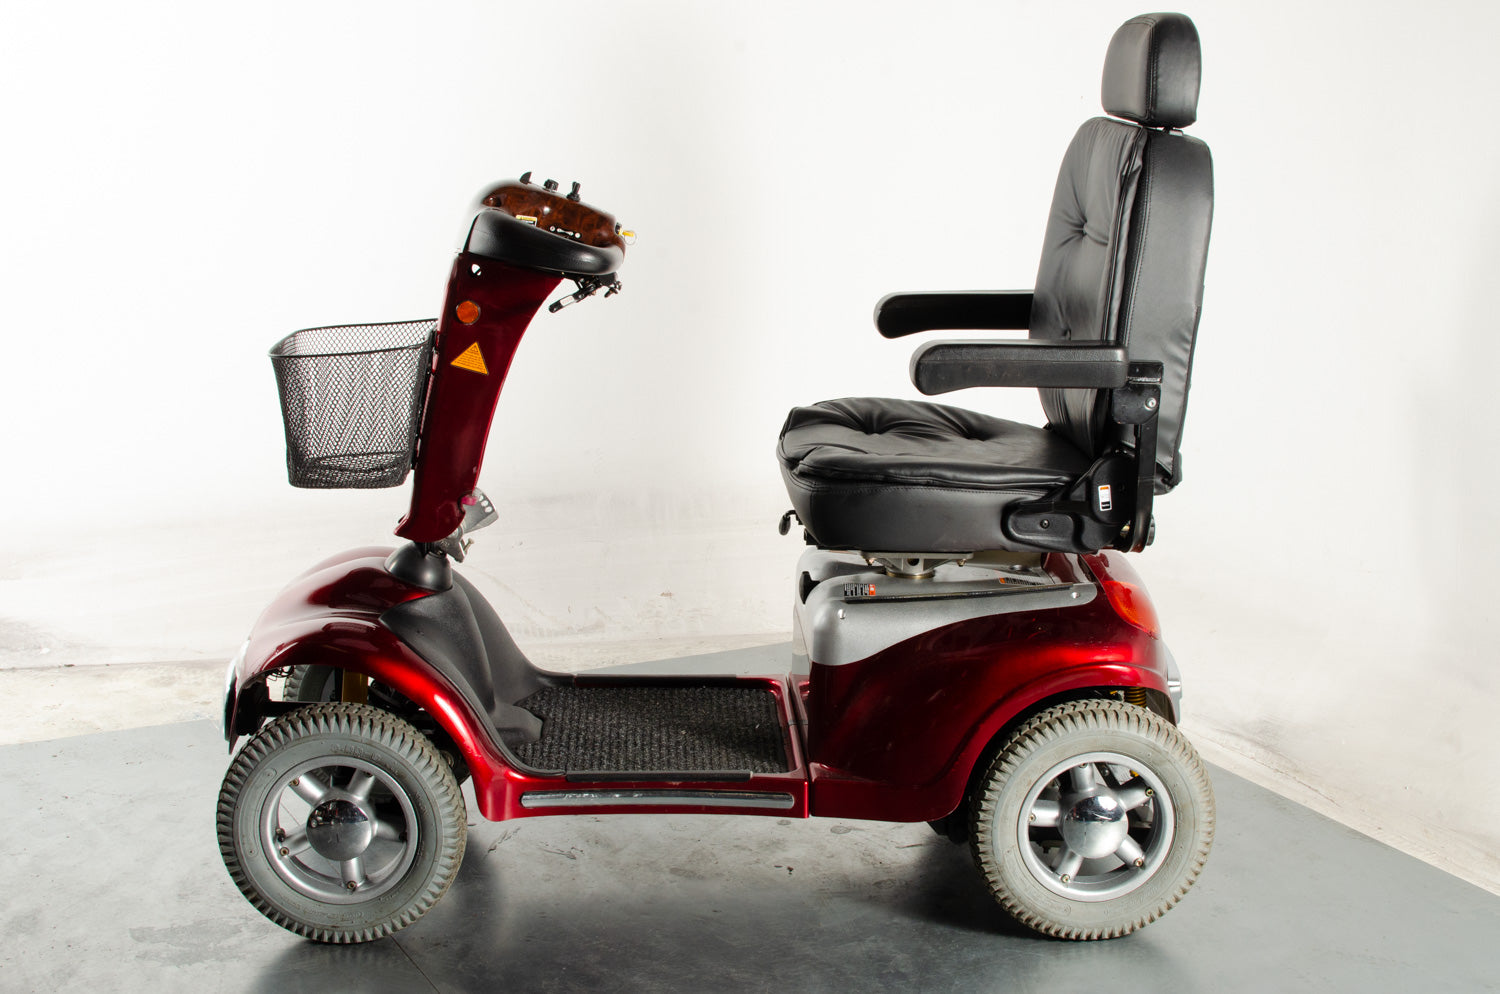 Shoprider Cordoba Off-Road All-Terrain Used Mobility Scooter Large 8mph Roma Red 12194